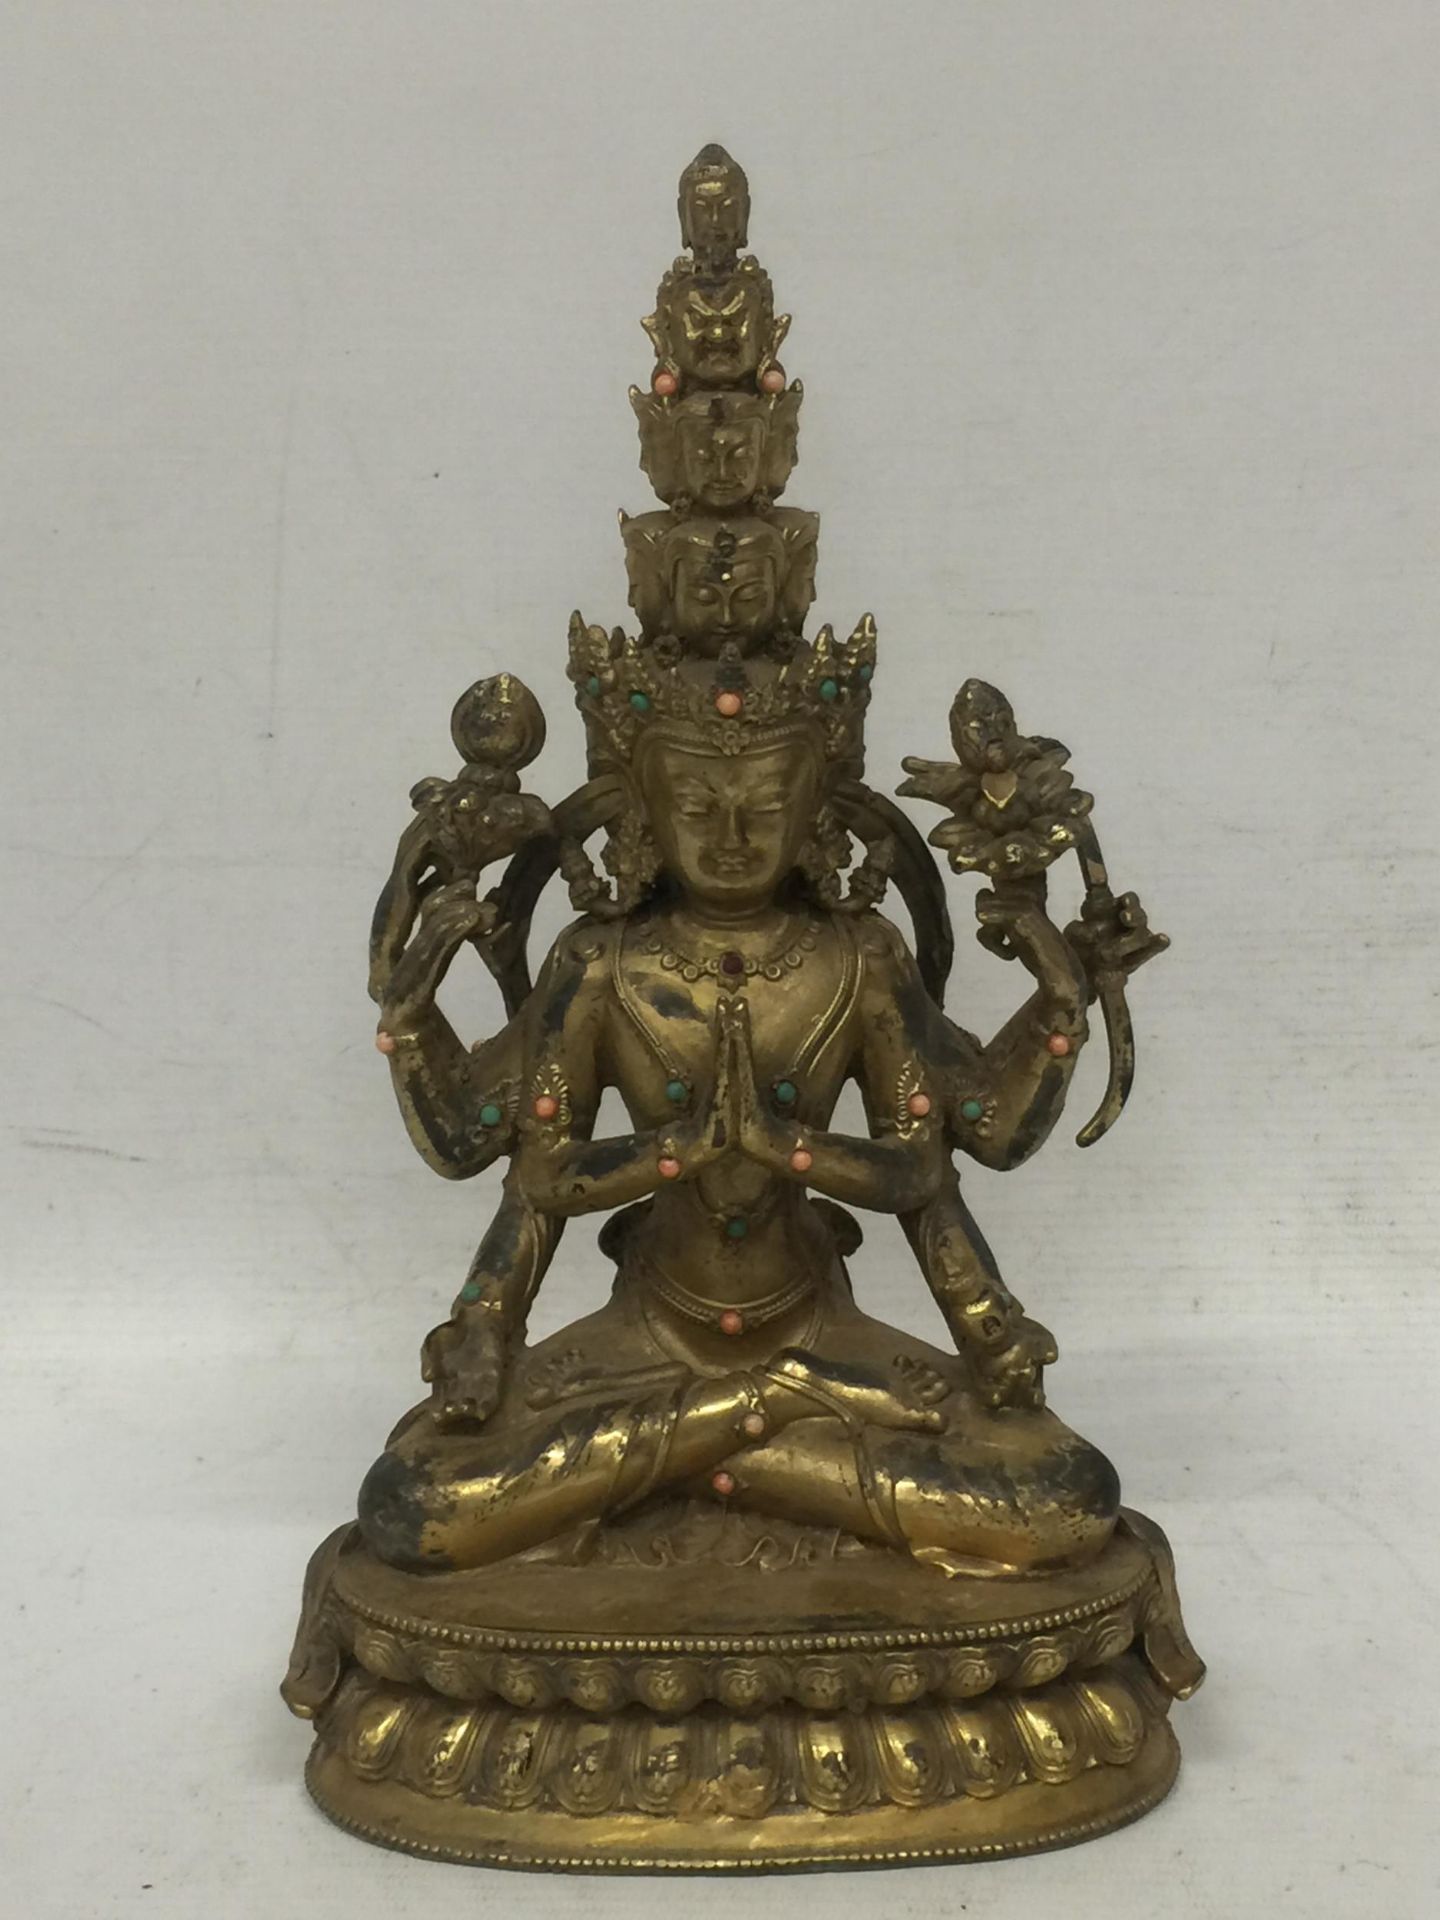 A GILT BRONZE REPOUSSE THRONE AND AUREOLE WITH BUDDHA